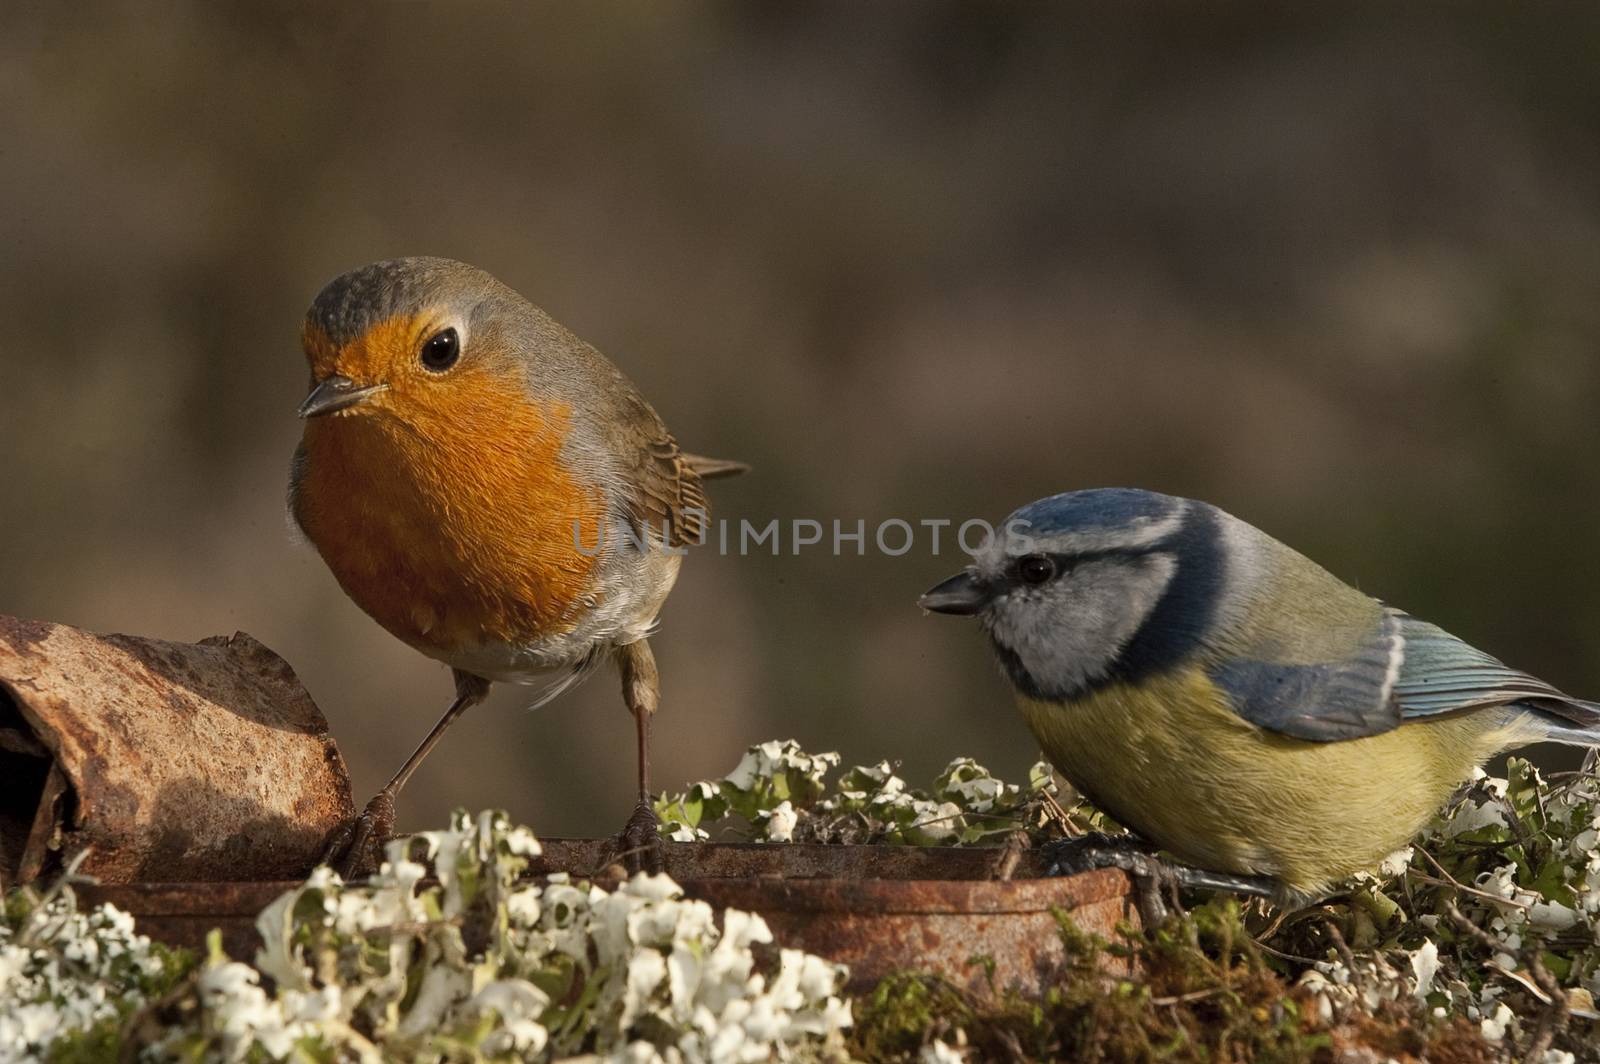 Robin - Erithacus rubecula and Blue tit, Cyanistes caeruleus, eating among the lichen